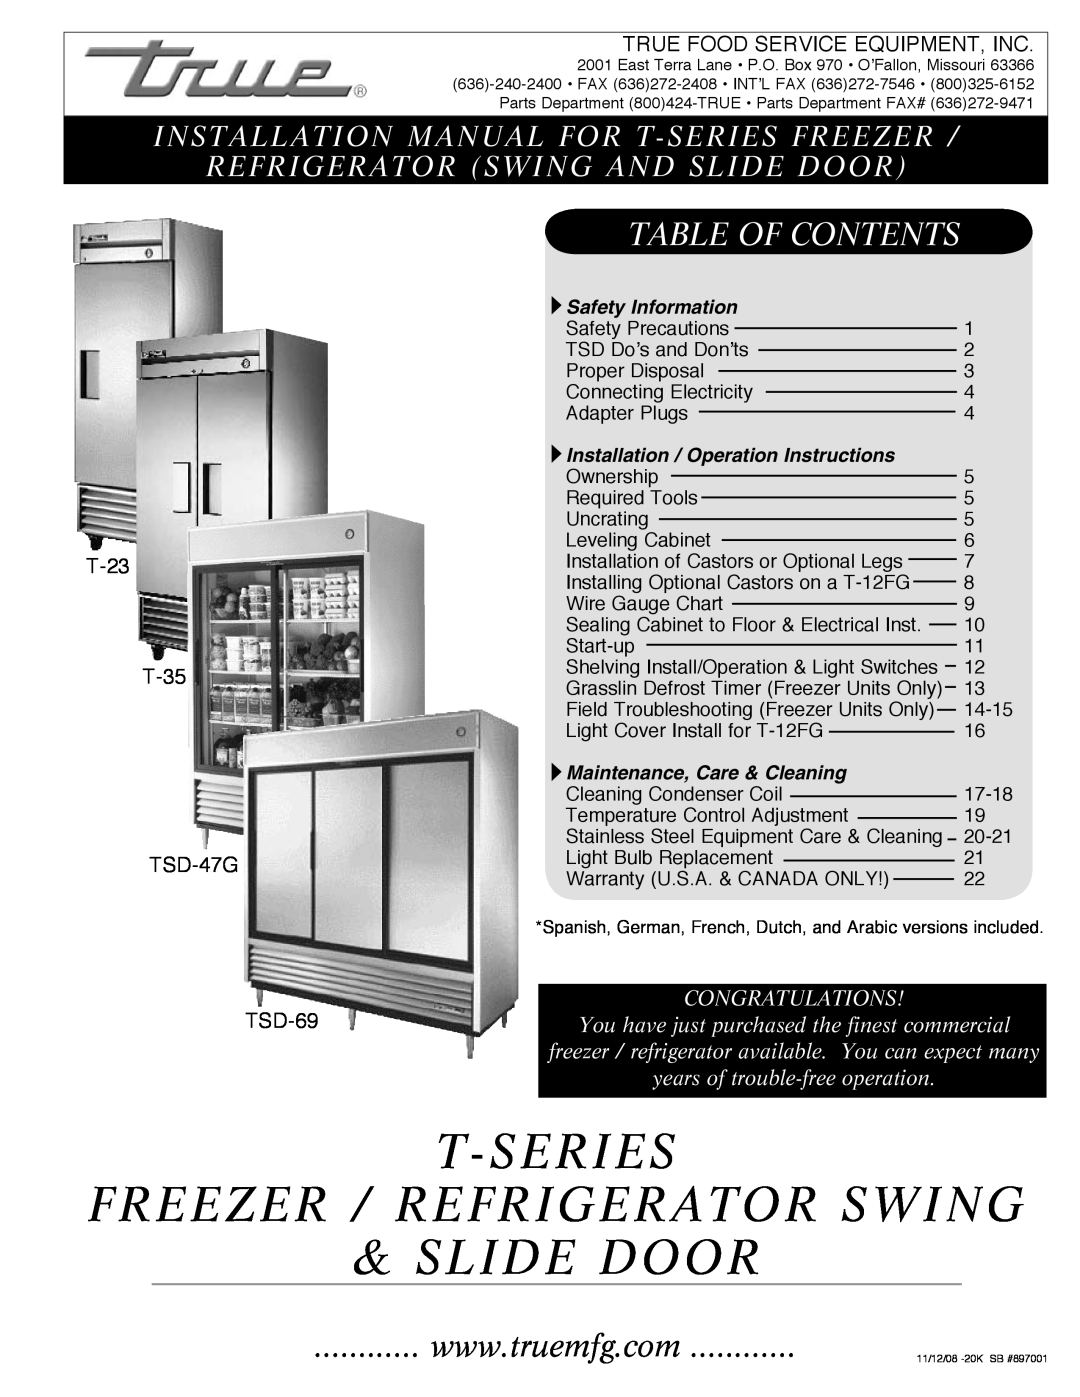 True Manufacturing Company T-35 installation manual T-Series Freezer / Refrigerator Swing, Slide Door, Table Of Contents 